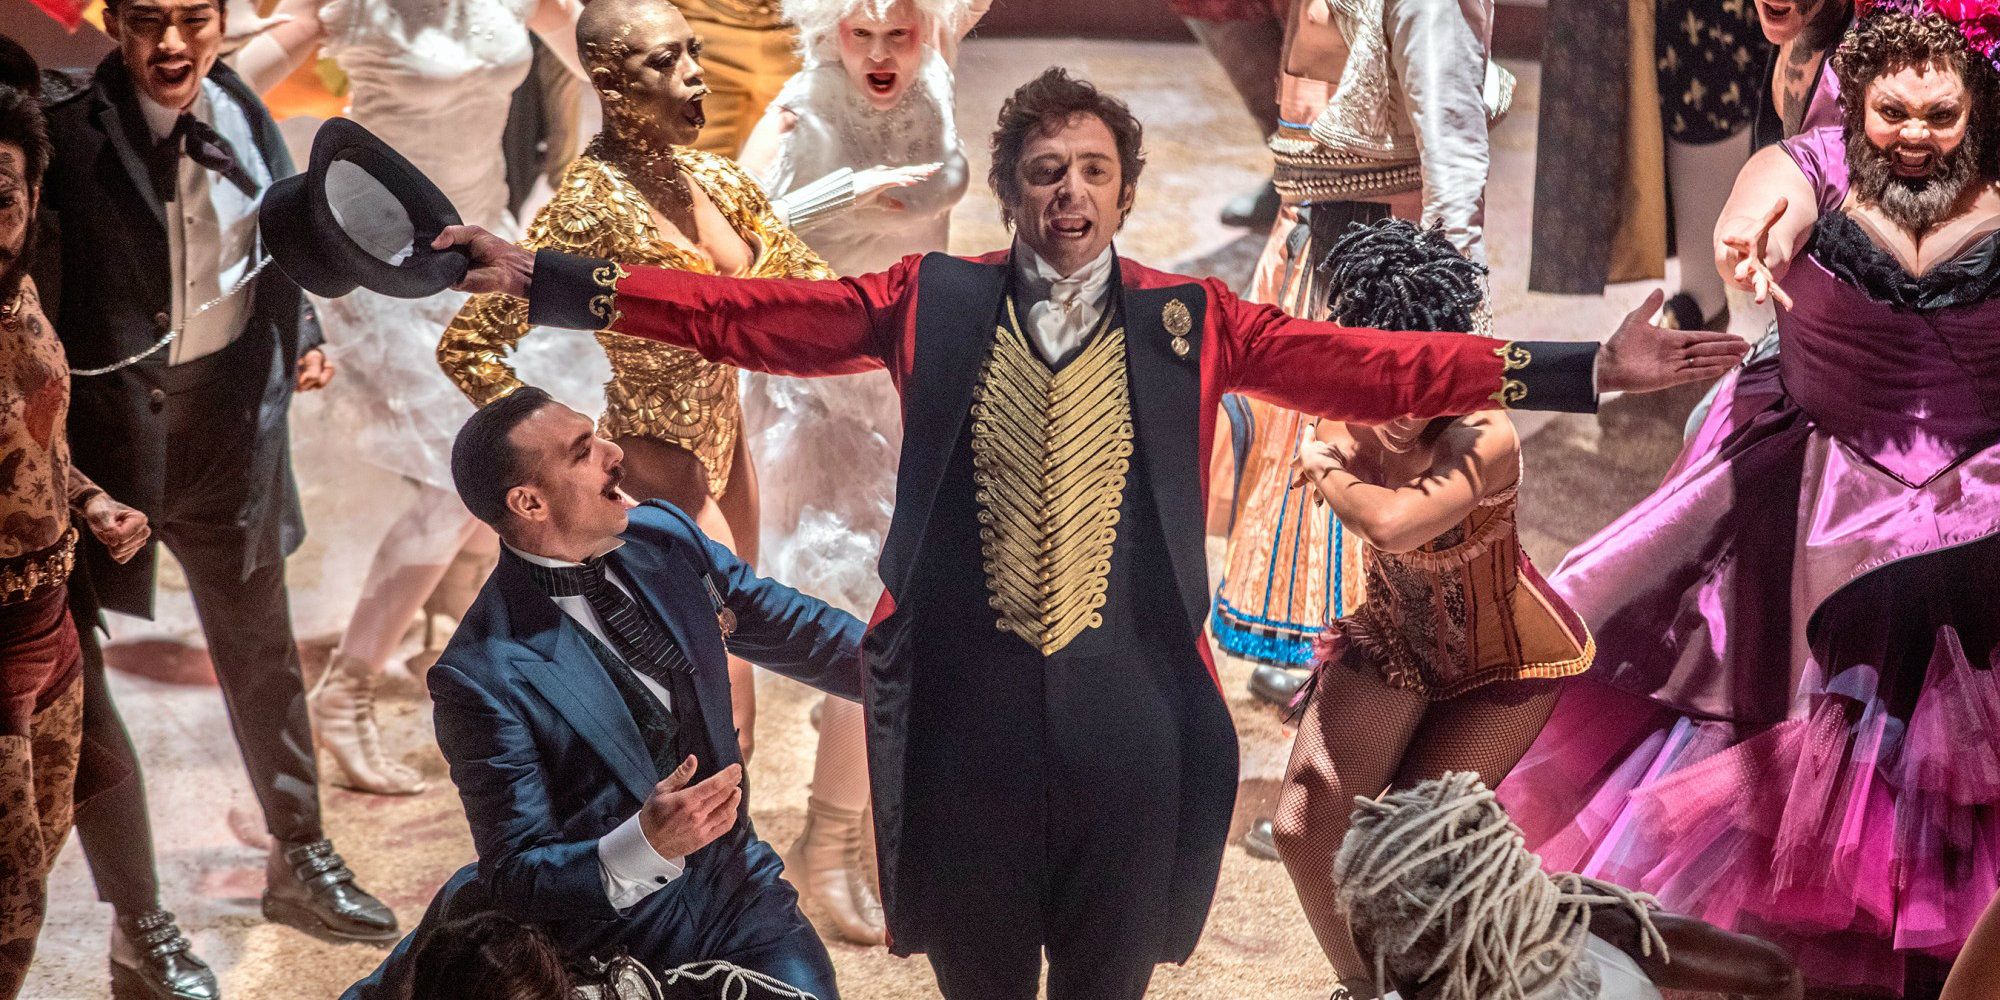 Hugh Jackman as PT Barnum posing amid the members of the circus in The Greatest Showman